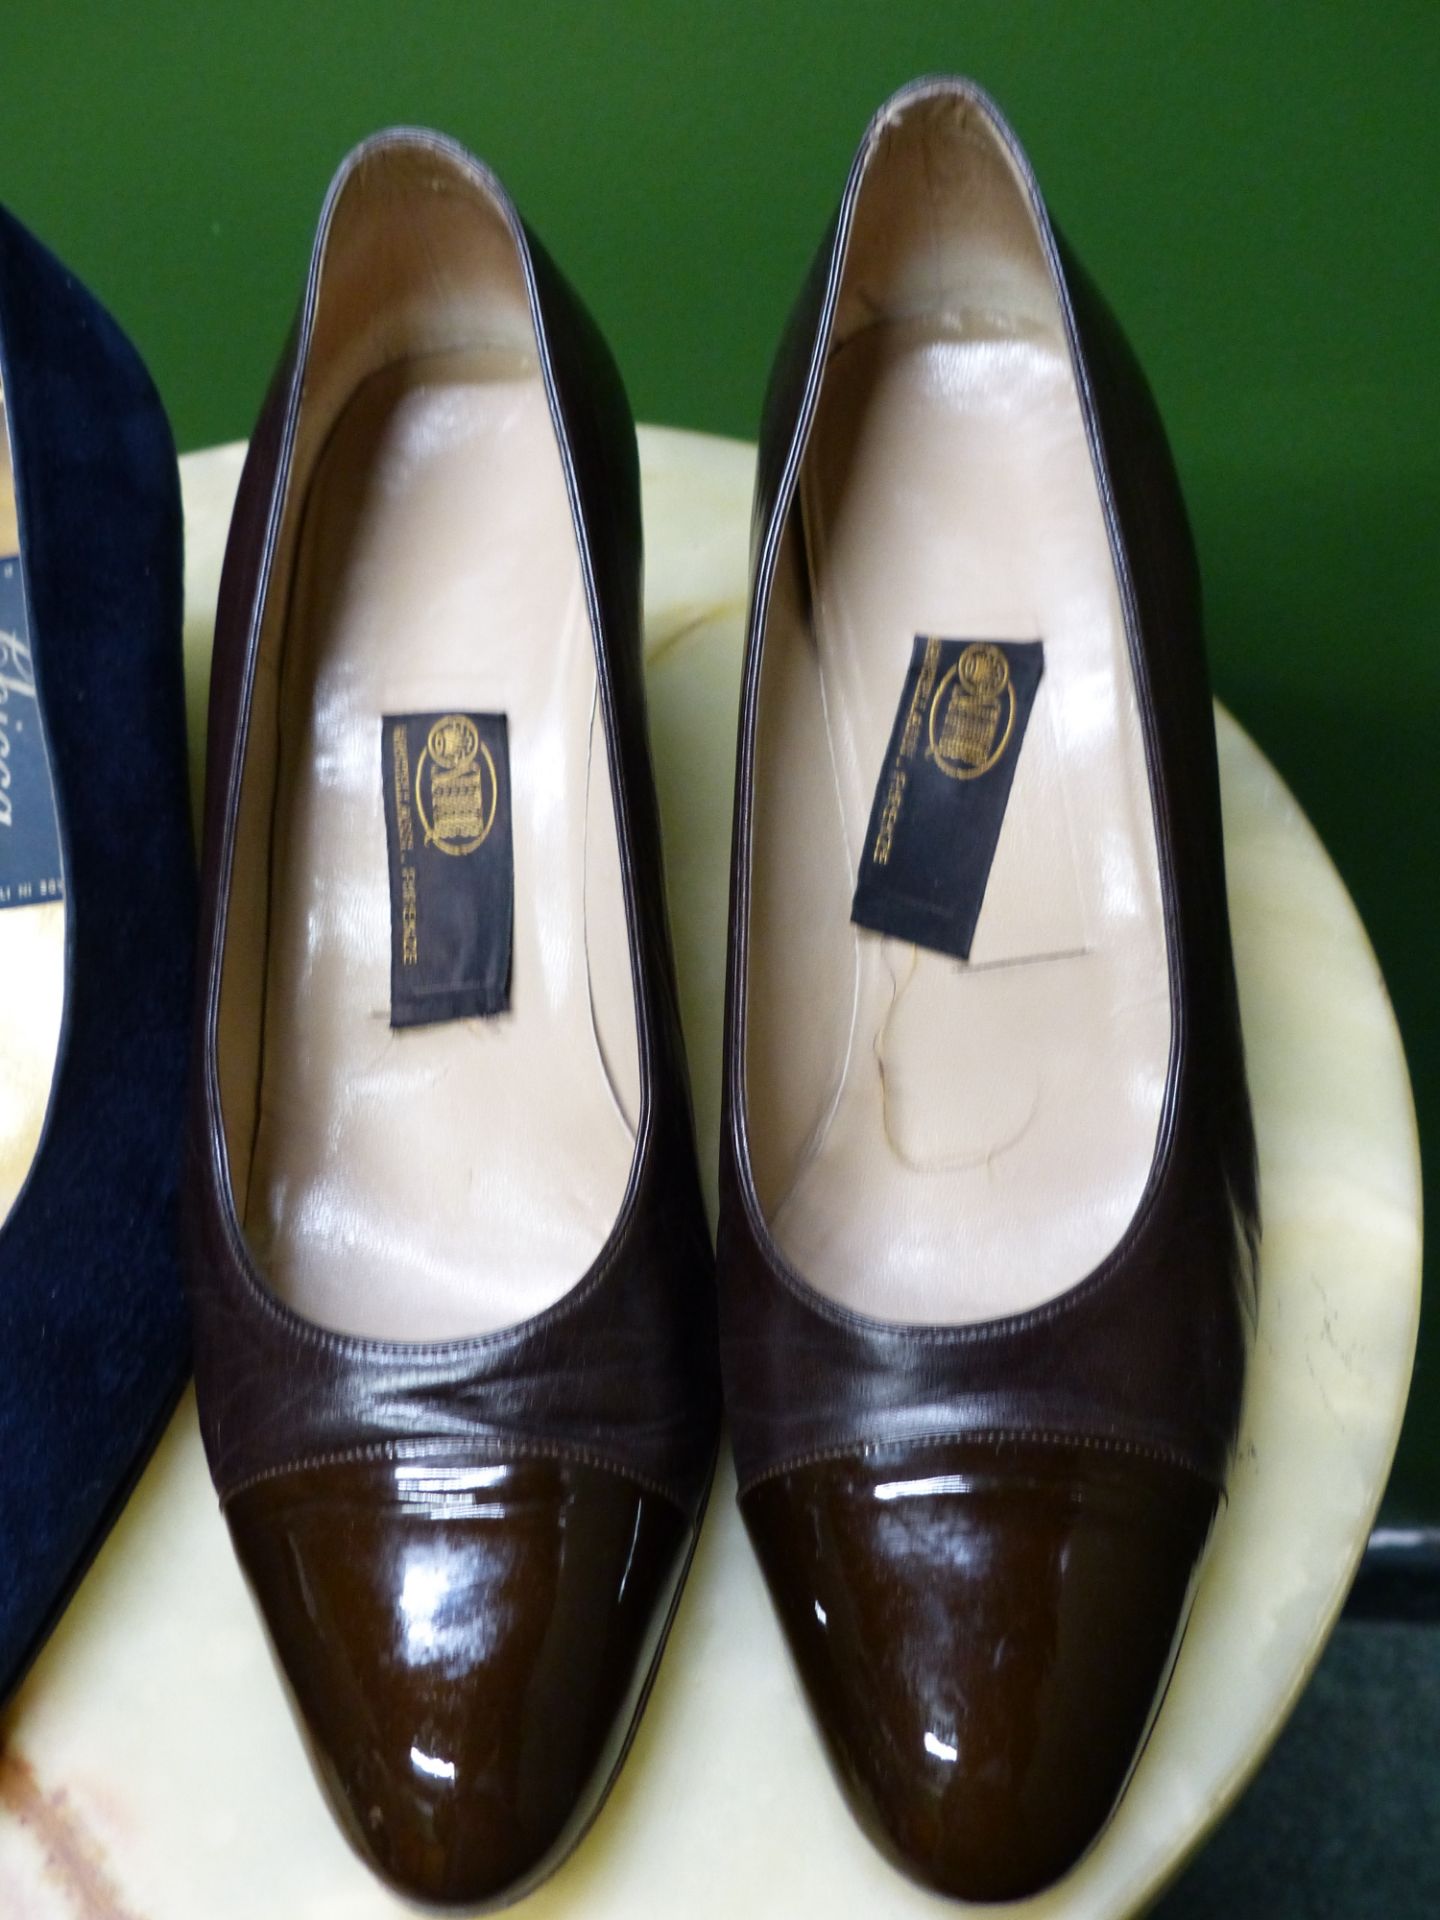 SHOES. SUTOR MANTELLASSI BROWN LEATHER HEALED EUR SIZE 39.5 (BOXED) TOGETHER WITH CHICCA LONDON BLUE - Image 3 of 9